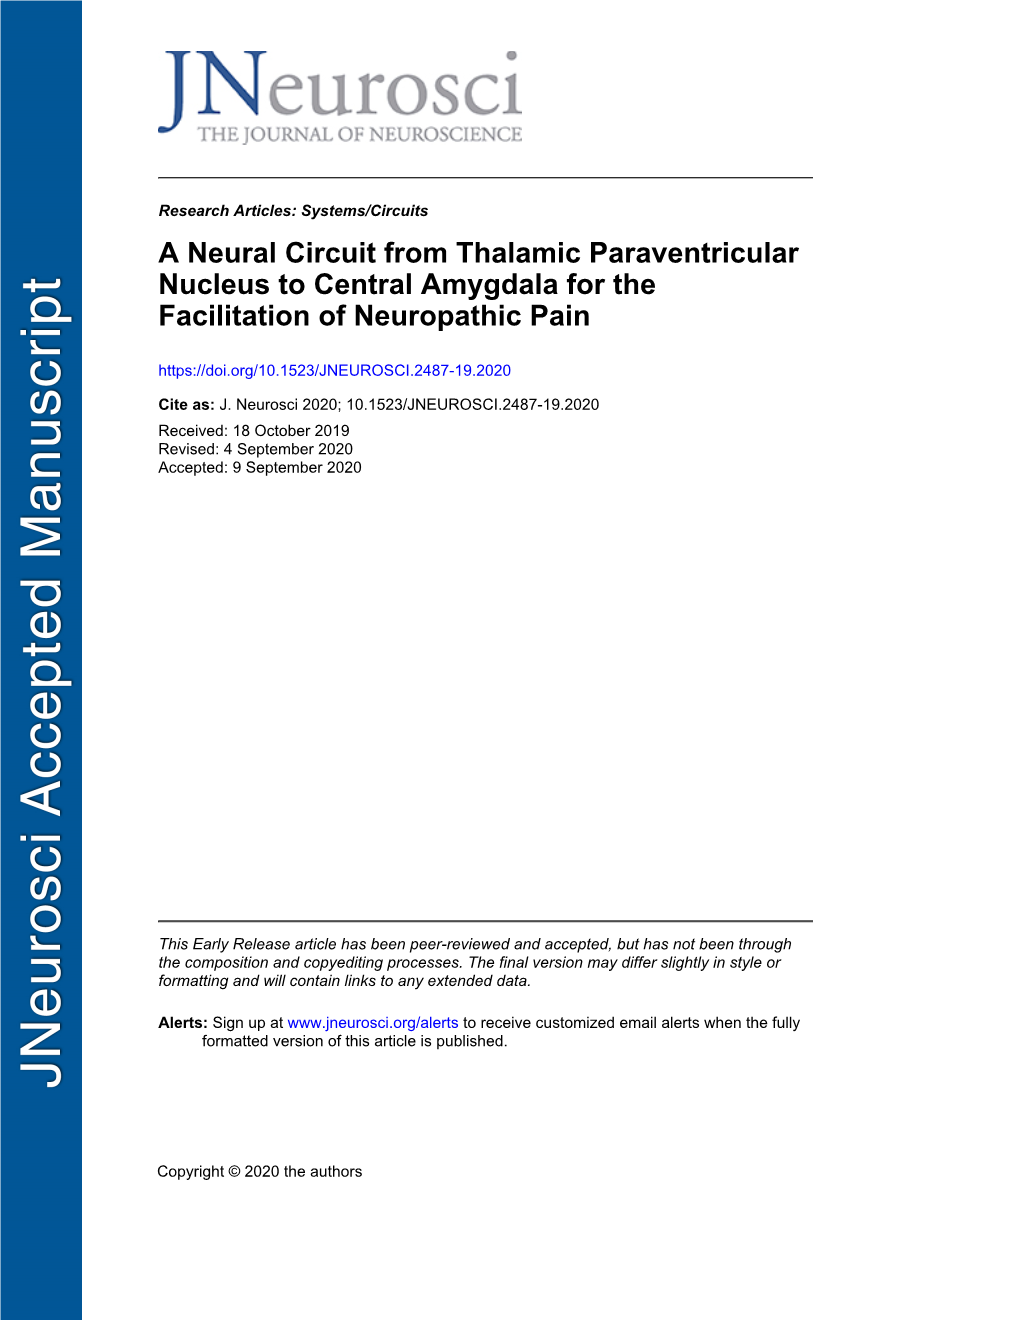 A Neural Circuit from Thalamic Paraventricular Nucleus to Central Amygdala for the Facilitation of Neuropathic Pain